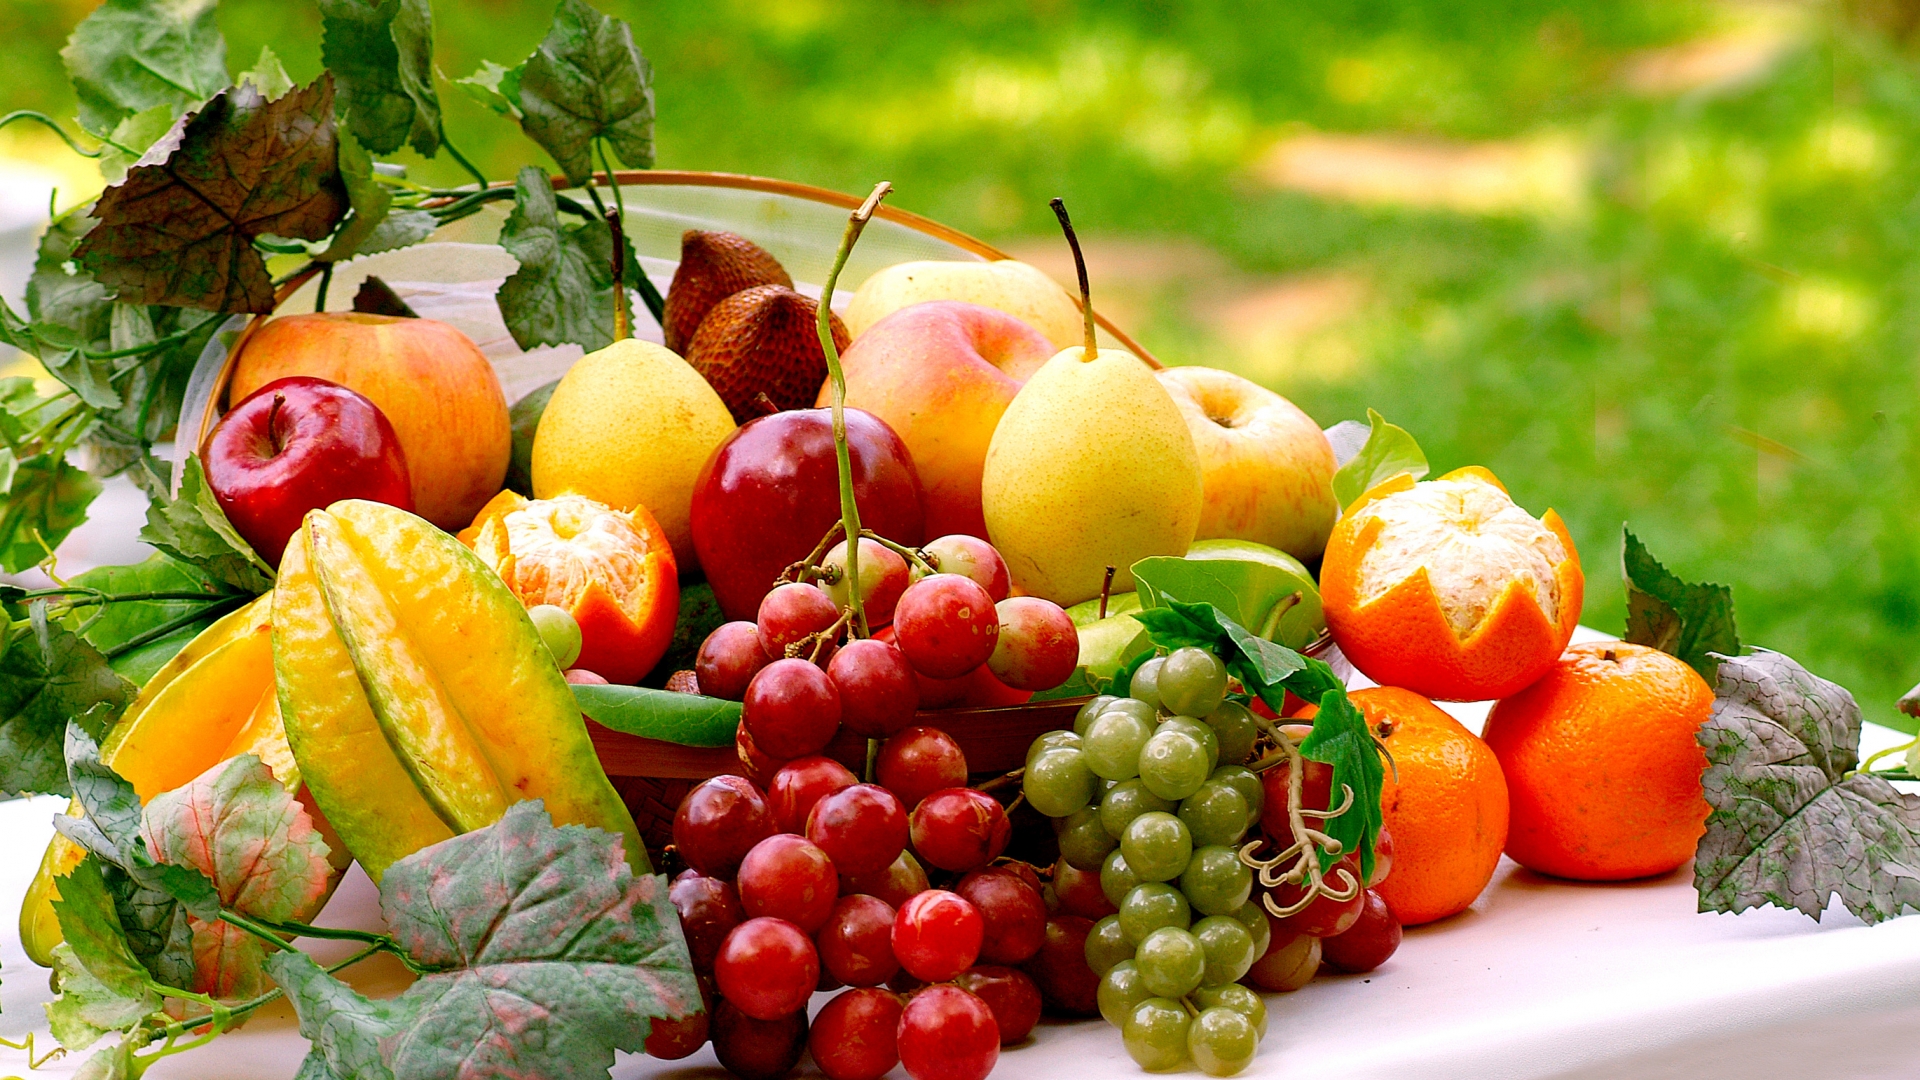 Fruits And Vegetables - HD Wallpaper 